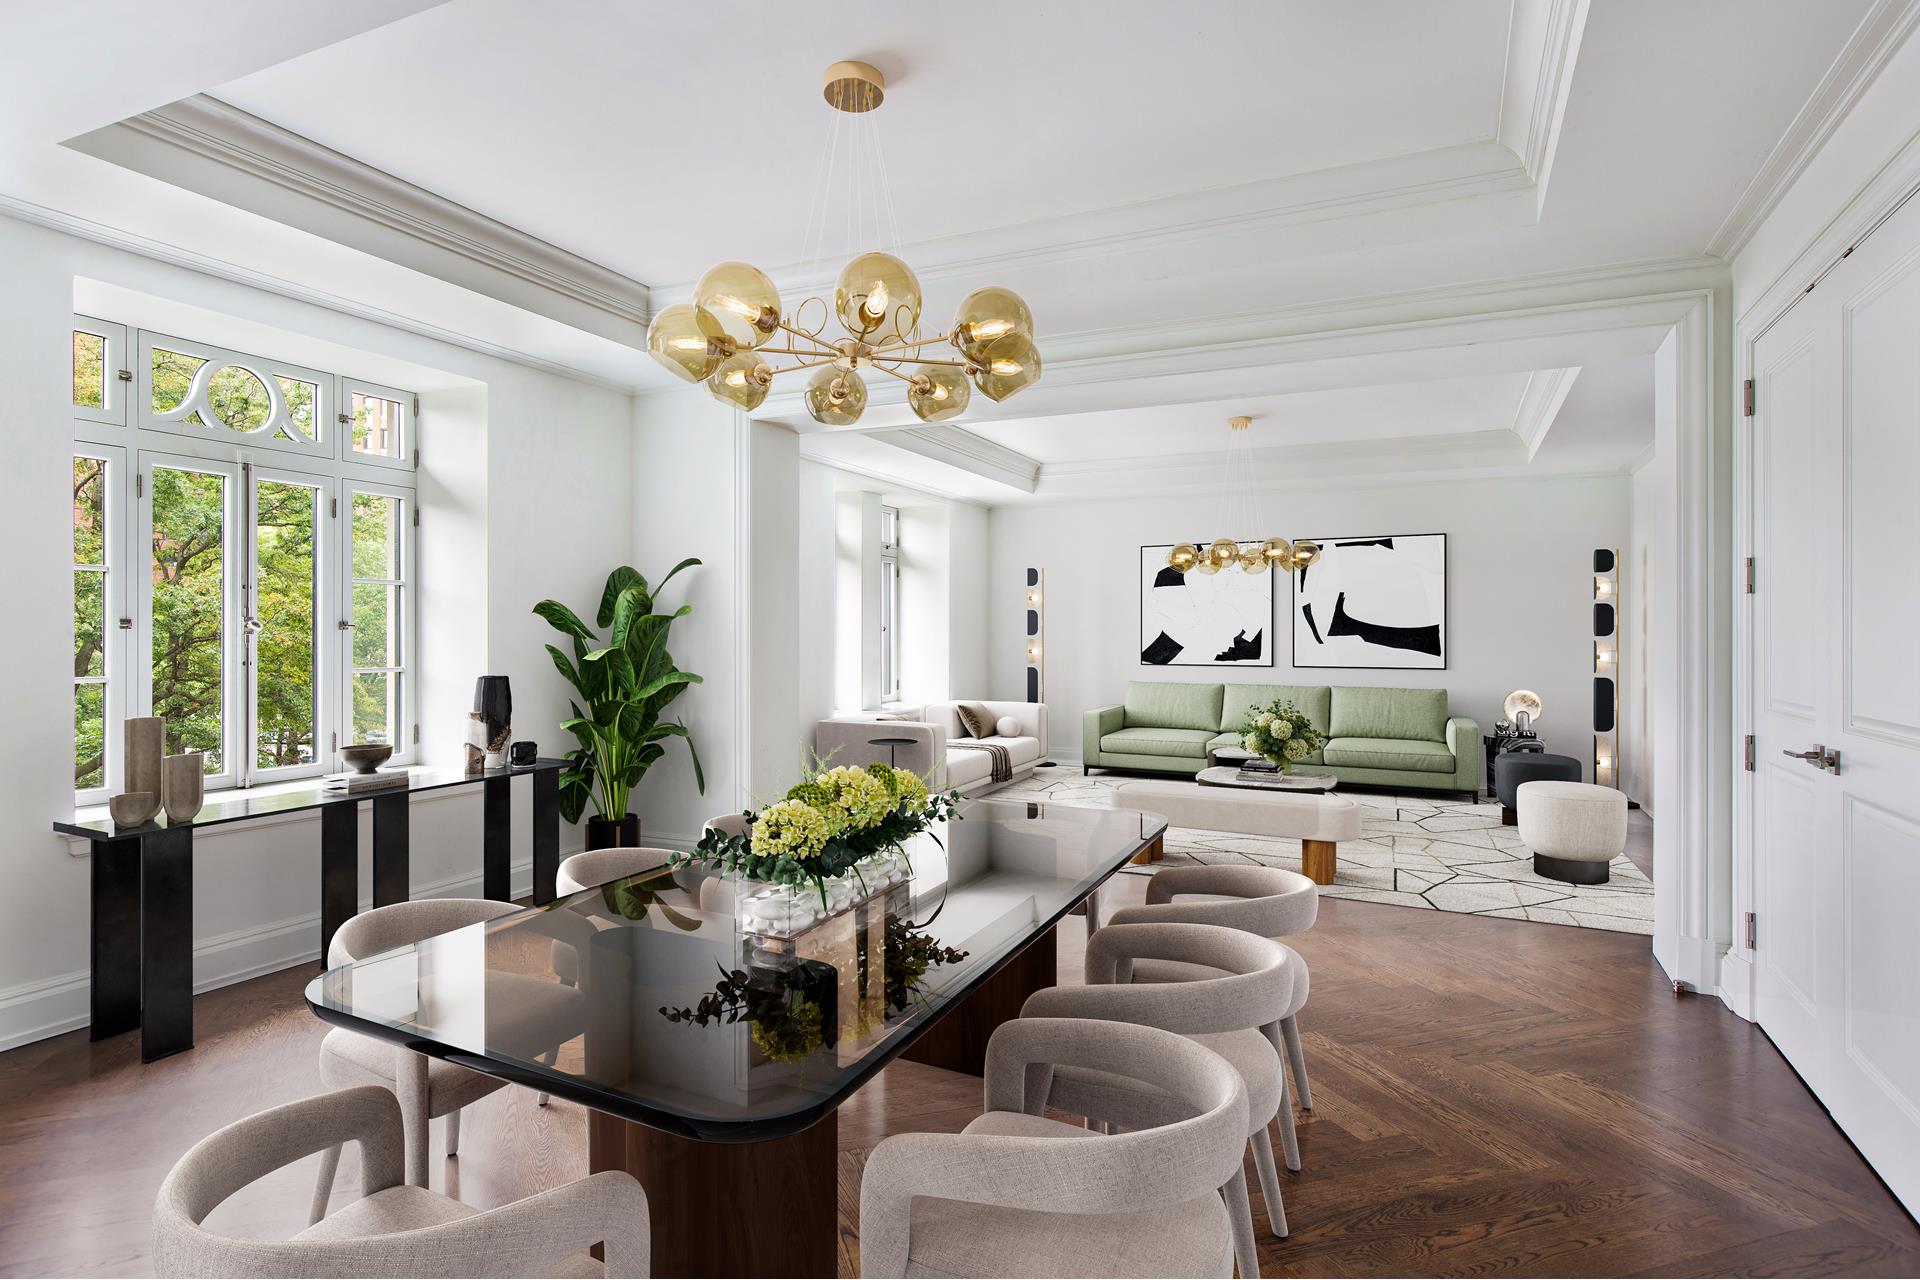 344 West 72nd Street 301, Lincoln Sq, Upper West Side, NYC - 5 Bedrooms  
5 Bathrooms  
8 Rooms - 